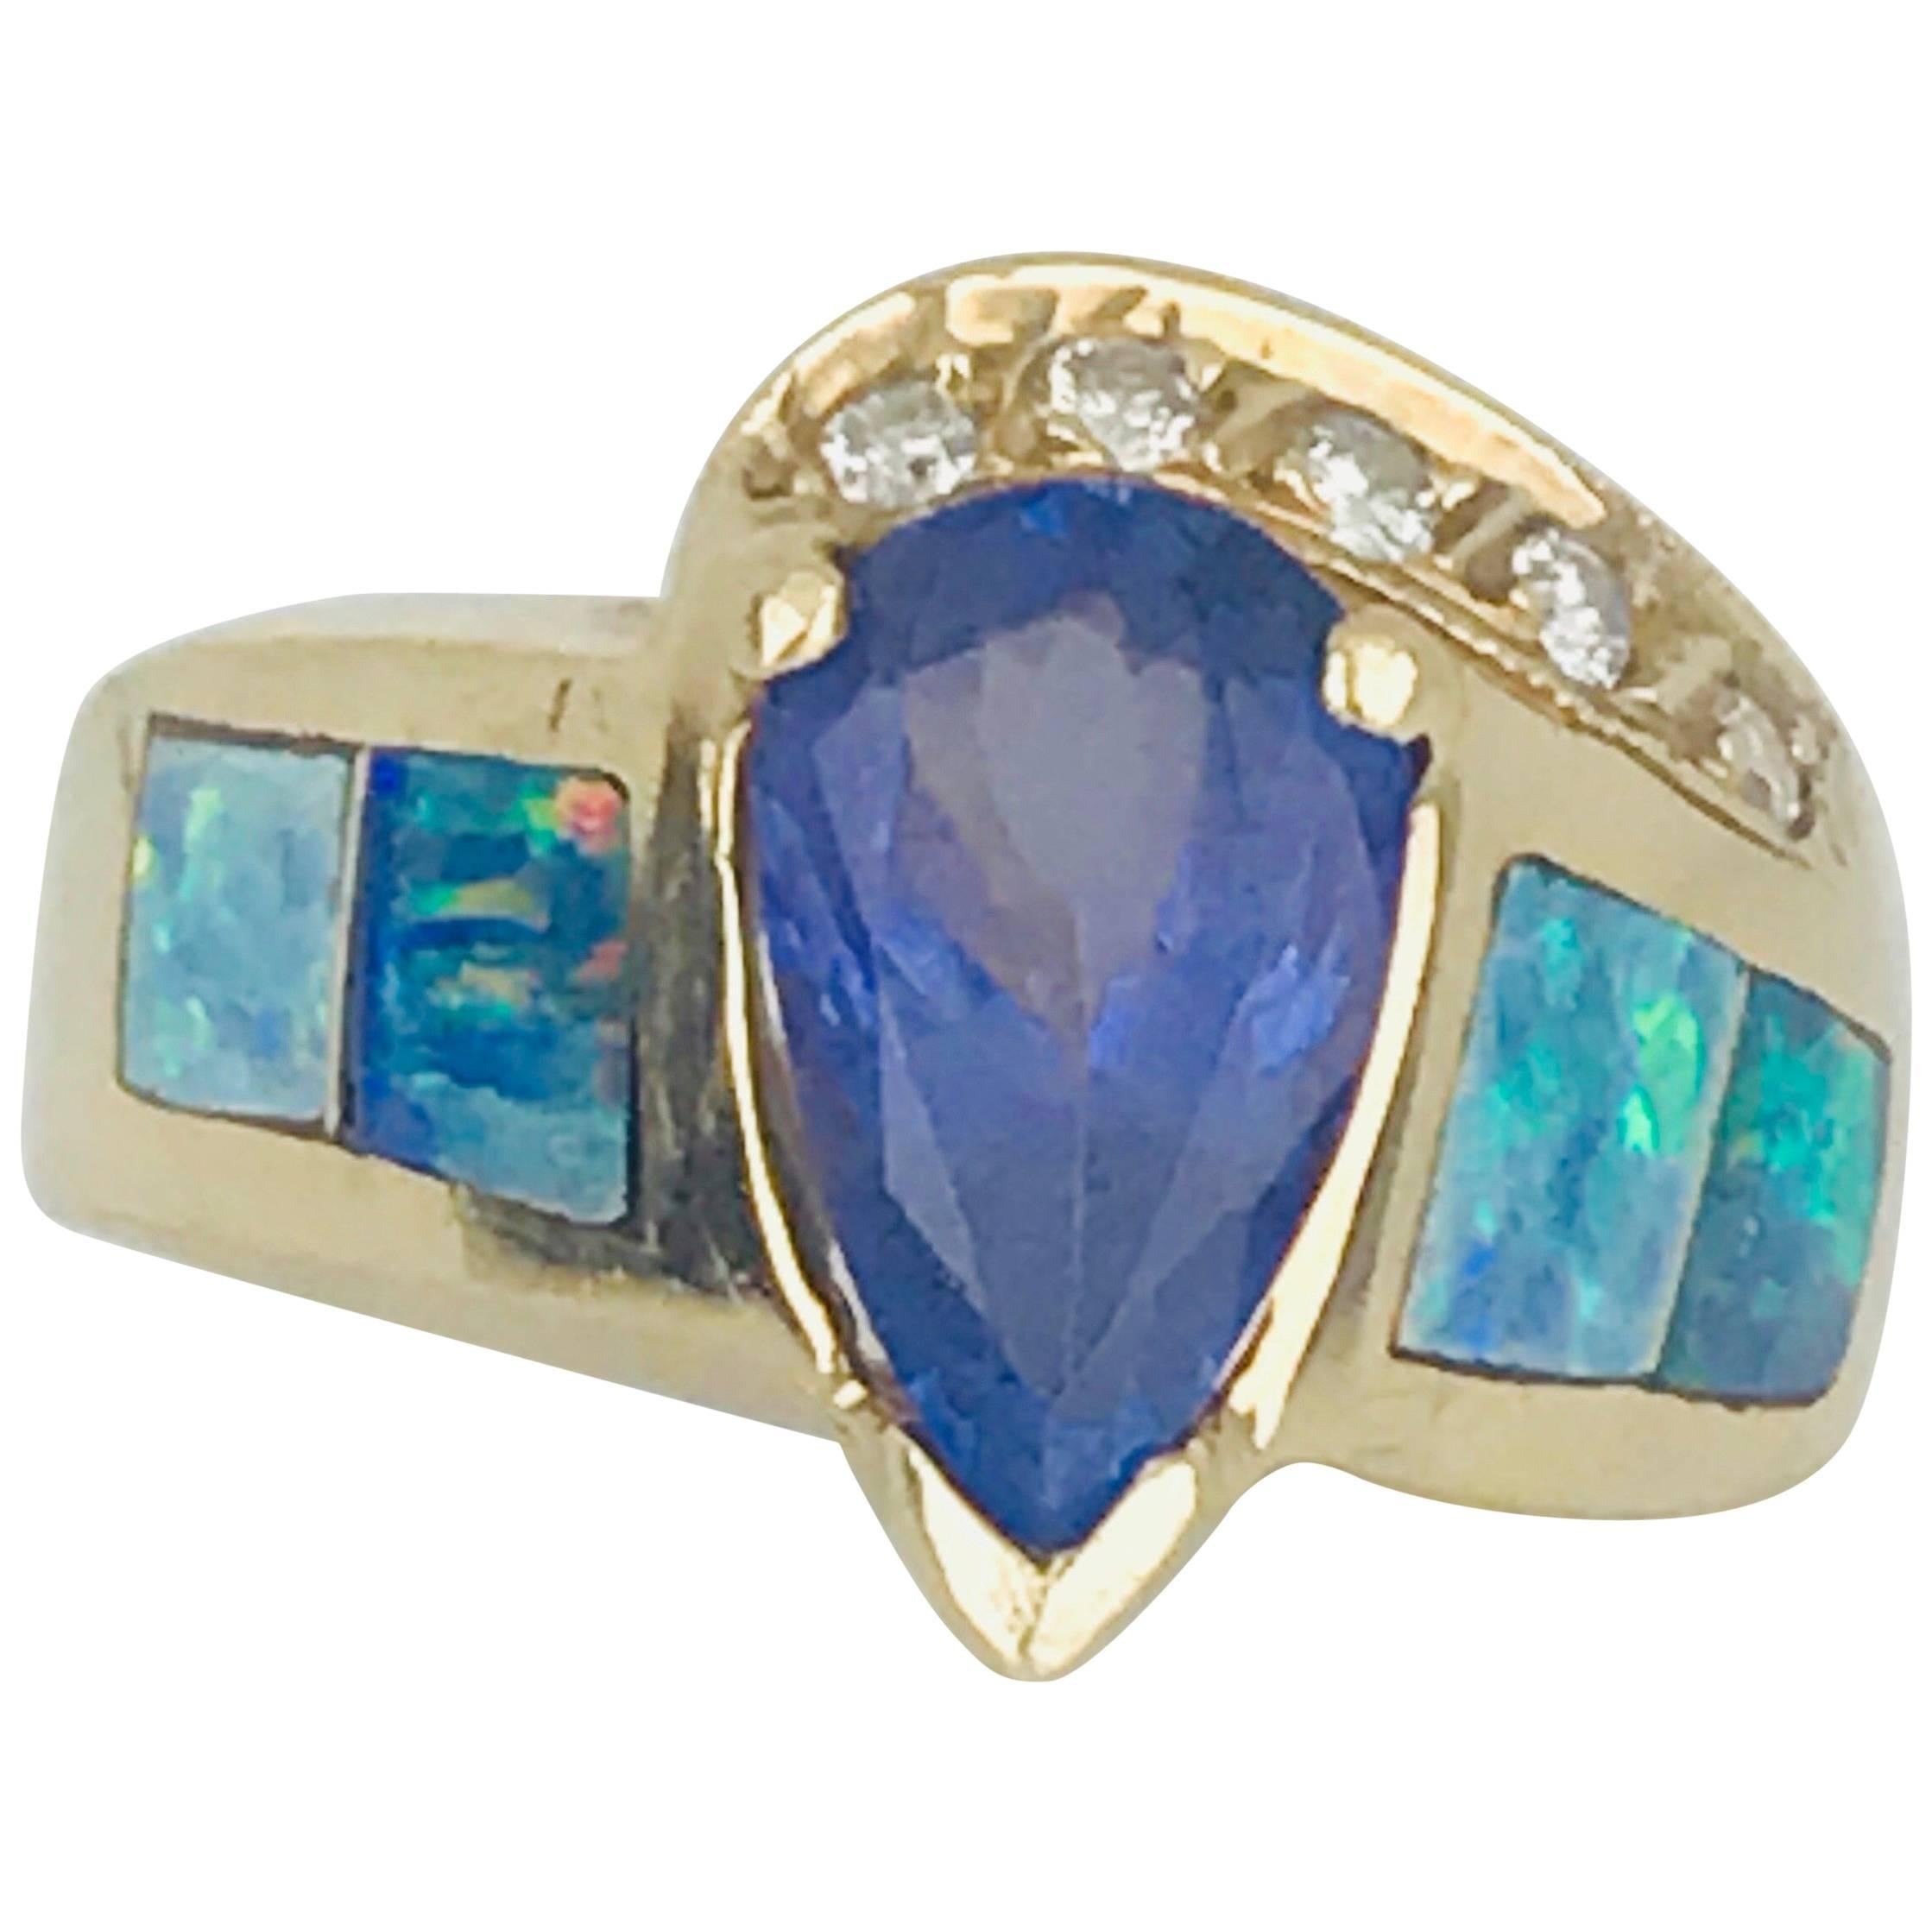 Tanzanite Pear Shaped Ring, Set with Australian Opal and Diamond, circa 1985 For Sale